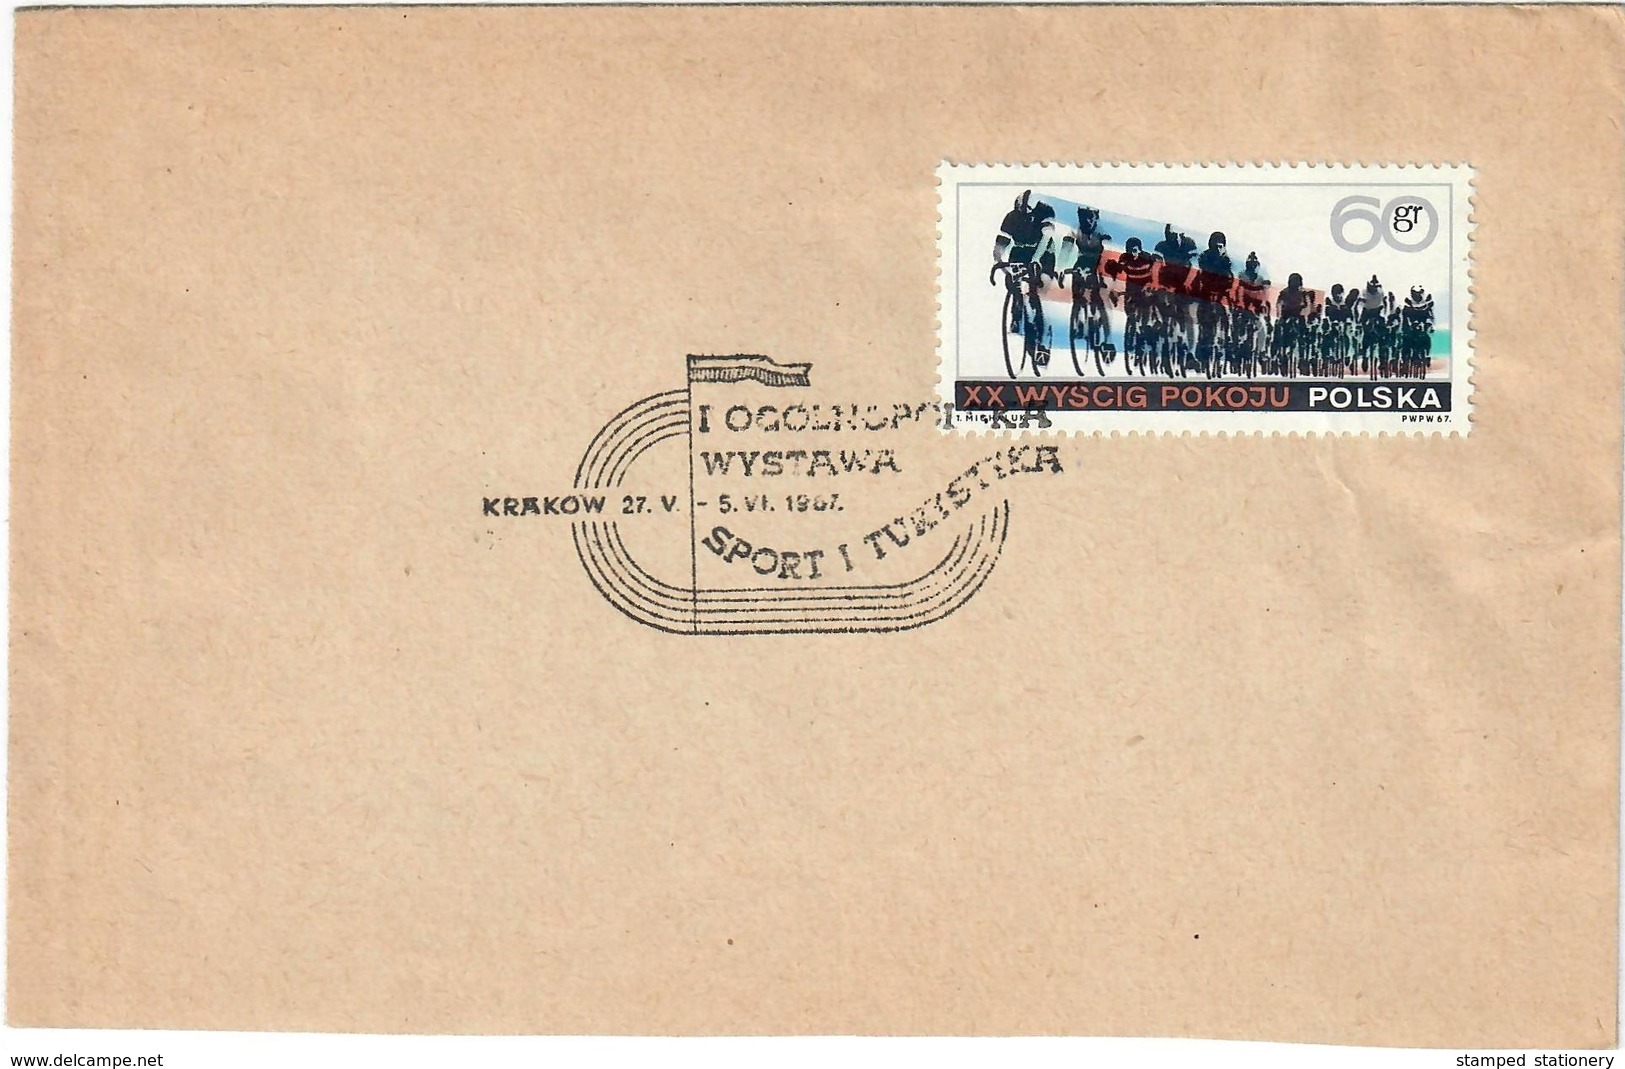 NATIONAL EXHIBITION SPORTS AND TOURISM 27.V-5.VI.1967 KRACOW - 60g. 20 XX INTERNATIONAL CYCLING RACE PEACE SCOTT #1501 - Radsport